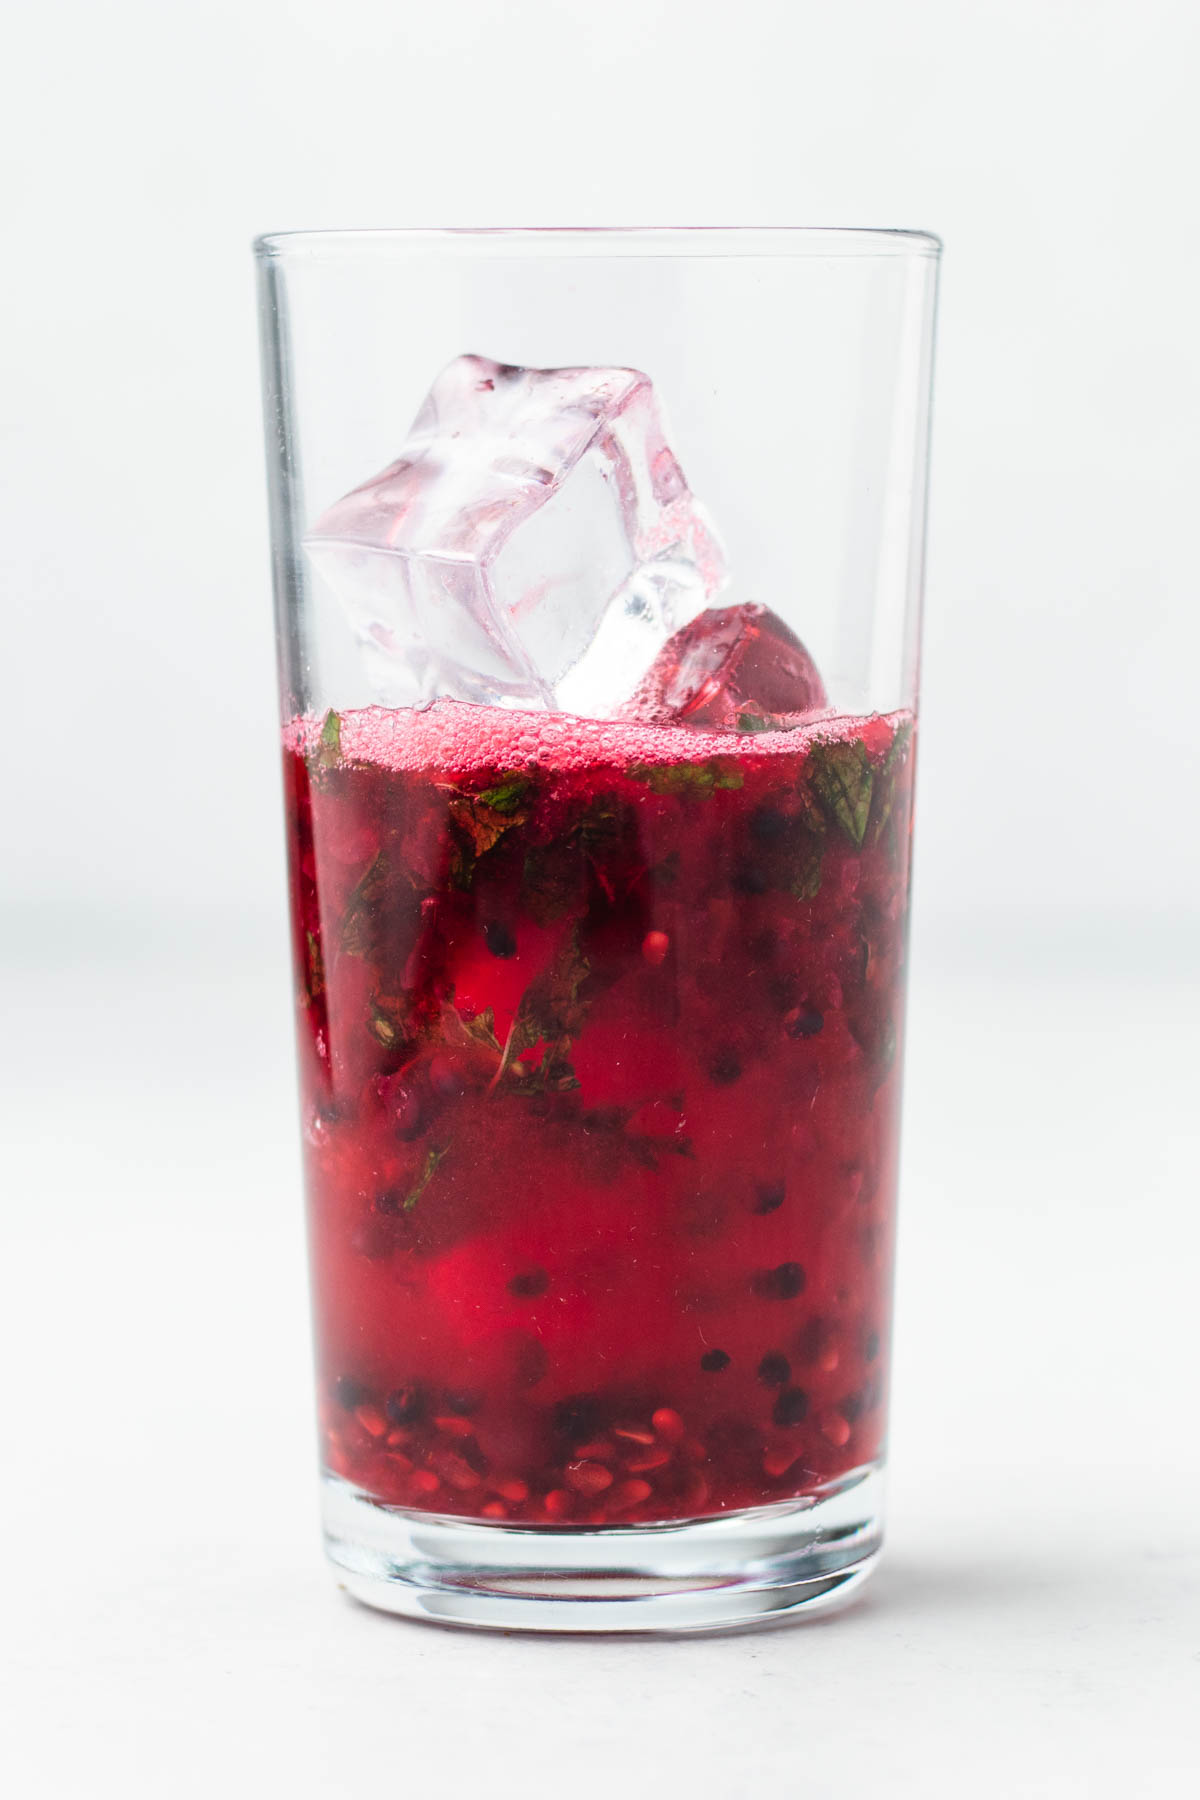 A glass with a blackberry drink and ice cubes.